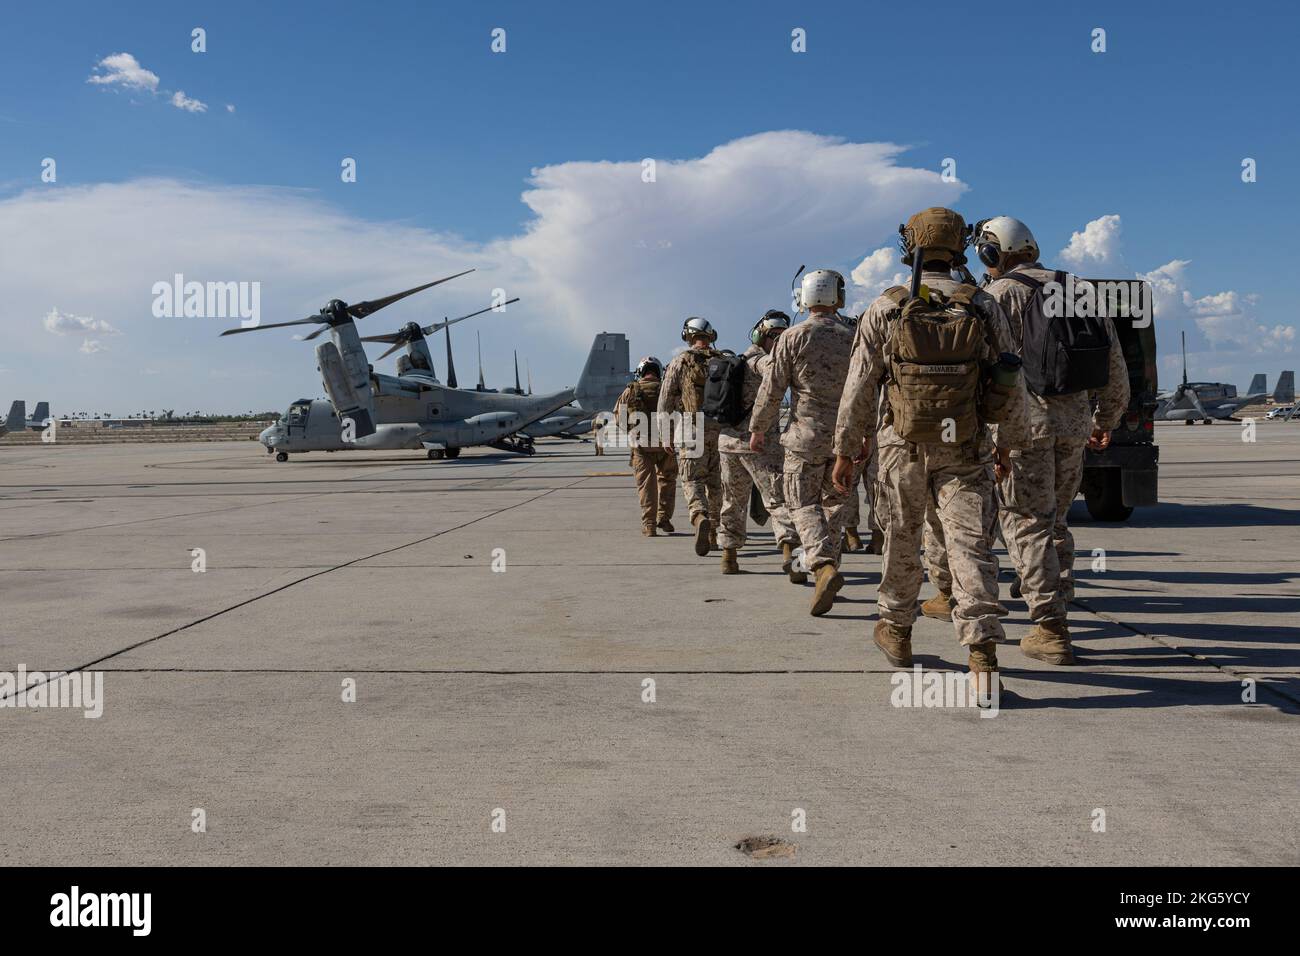 U.S. Marines assigned to Marine Aviation Weapons and Tactics Squadron One (MAWTS-1) prepare to embark an MV-22B Osprey during Weapons and Tactics Instructors (WTI) course 1-23 at Marine Corps Air Station Yuma, Arizona, Oct. 5, 2022. WTI is a seven-week training event hosted by MAWTS-1, providing standardized advanced tactical training and certification of unit instructor qualifications to support Marine aviation training and readiness, and assists in developing and employing aviation weapons and tactics. Stock Photo